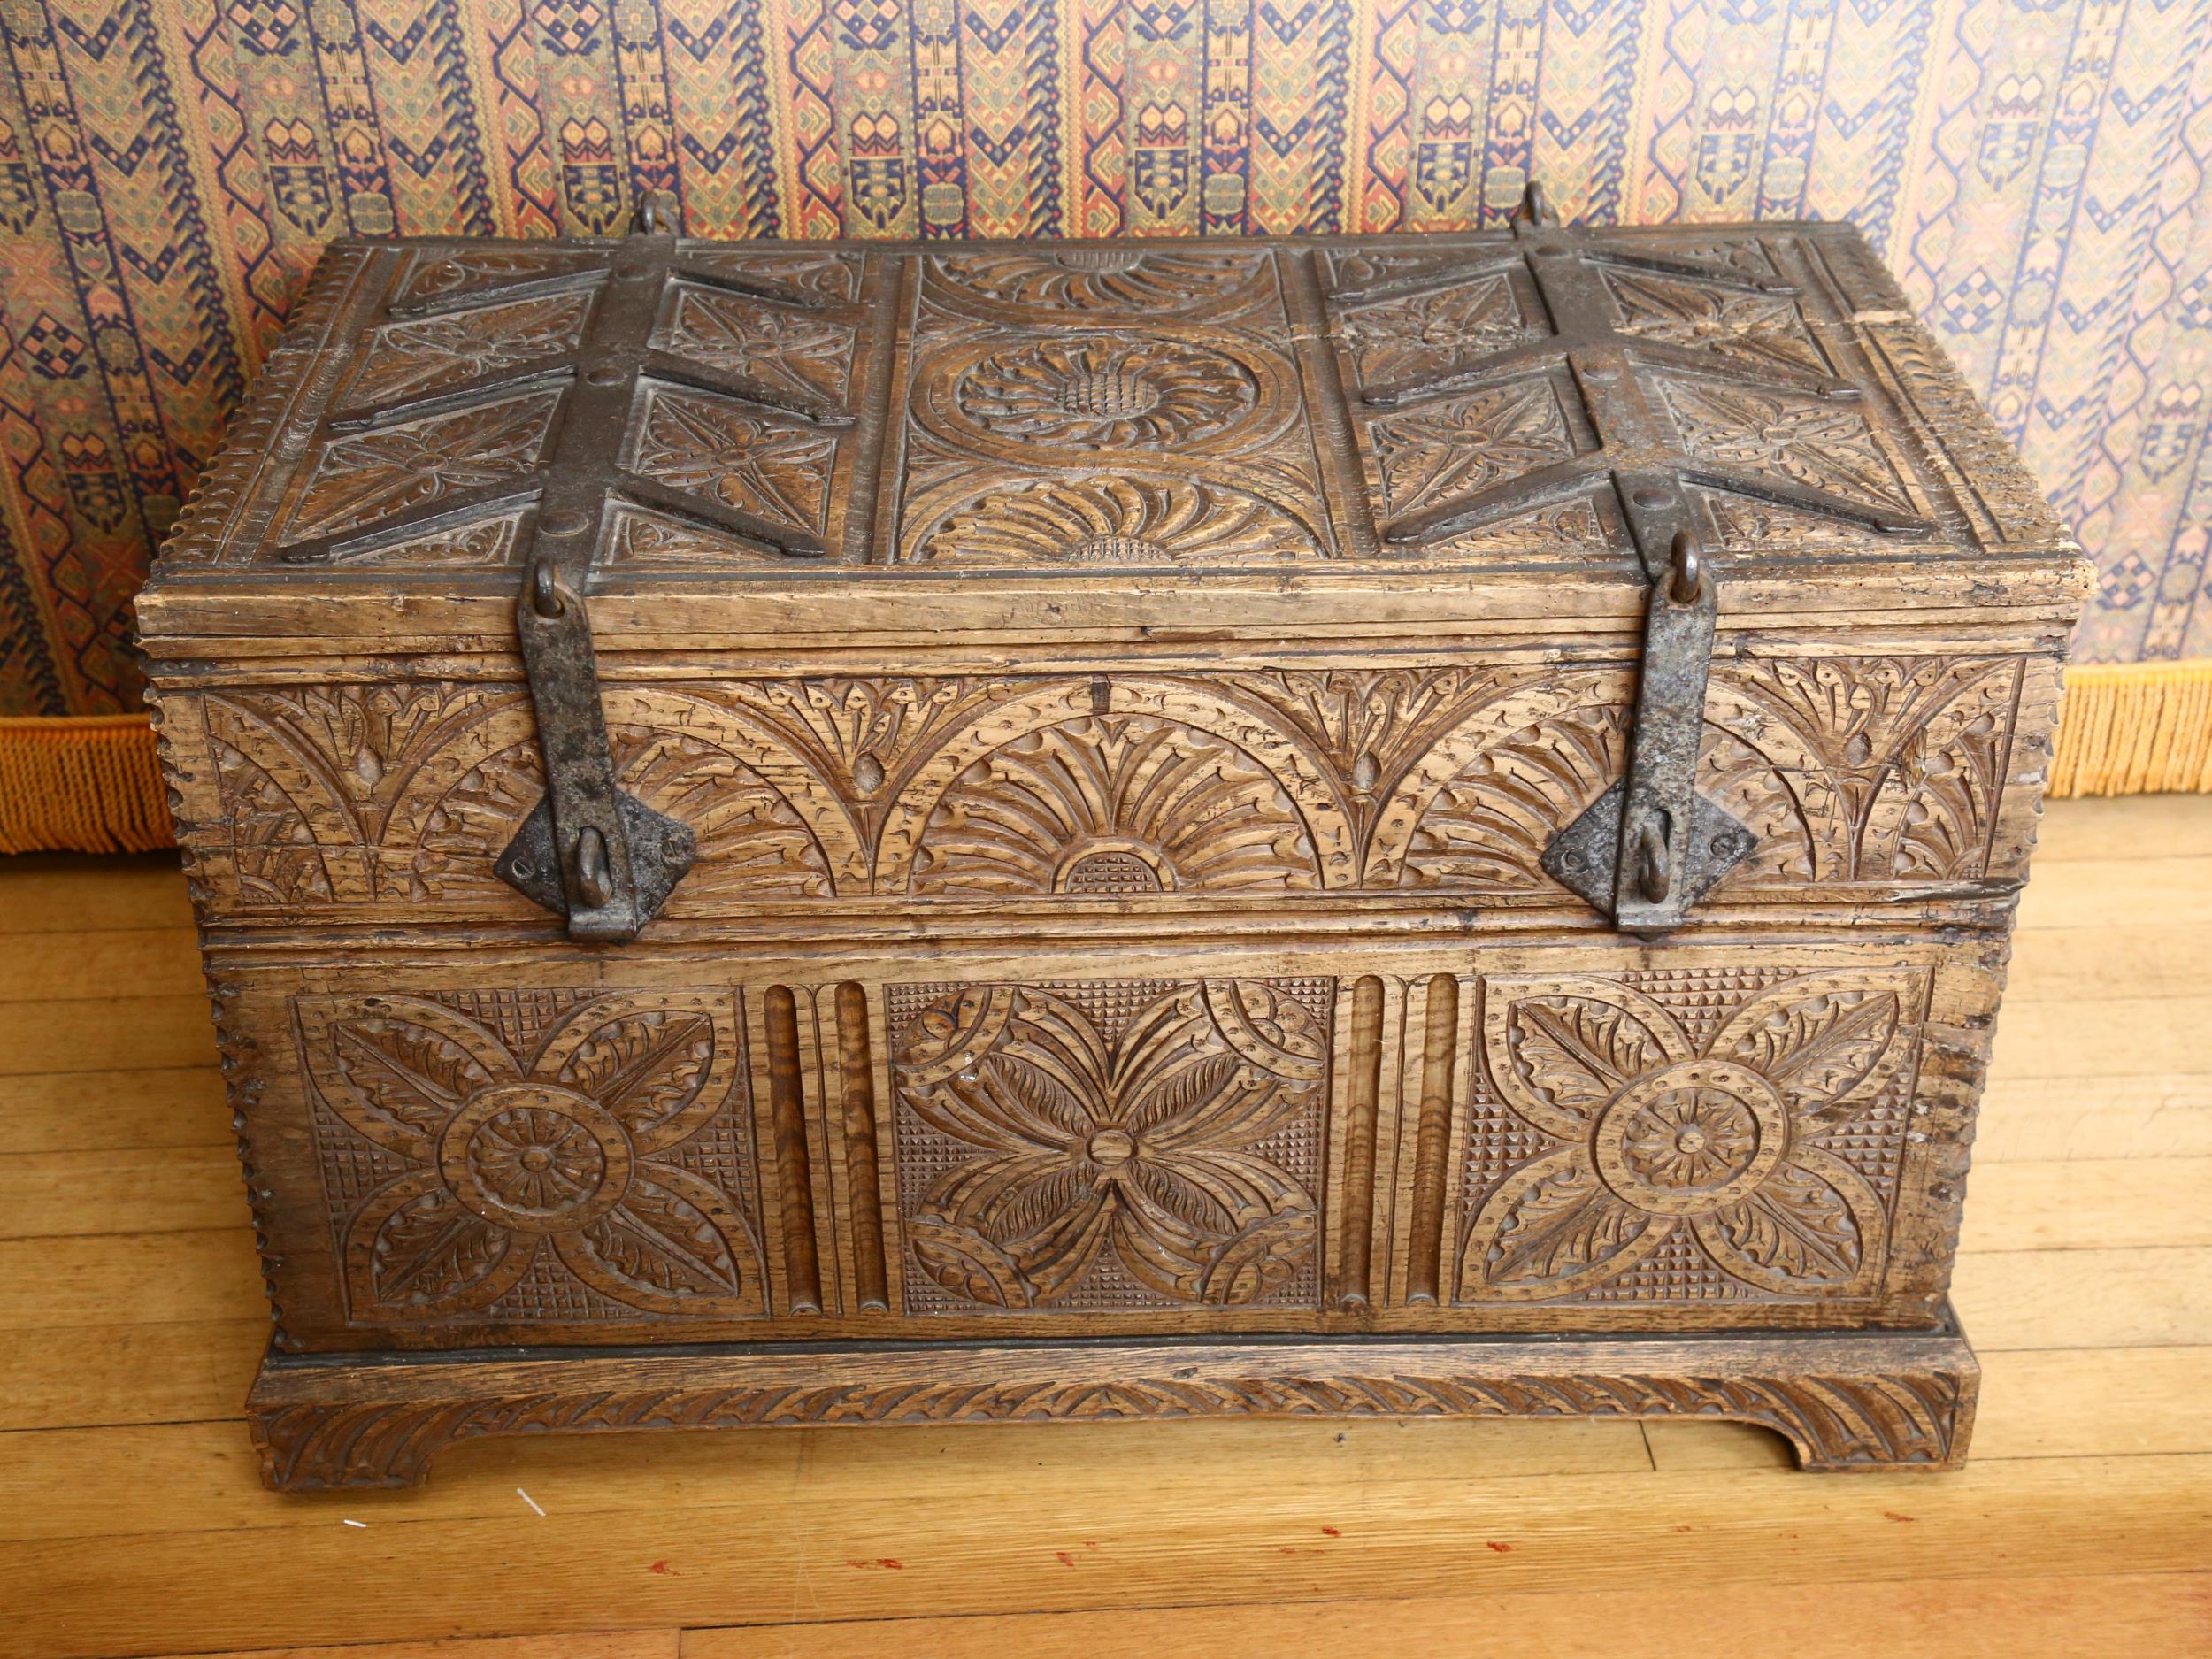 18th century Continental oak chest, heavy iron strapwork hinges and hasps to the lid, allover chip